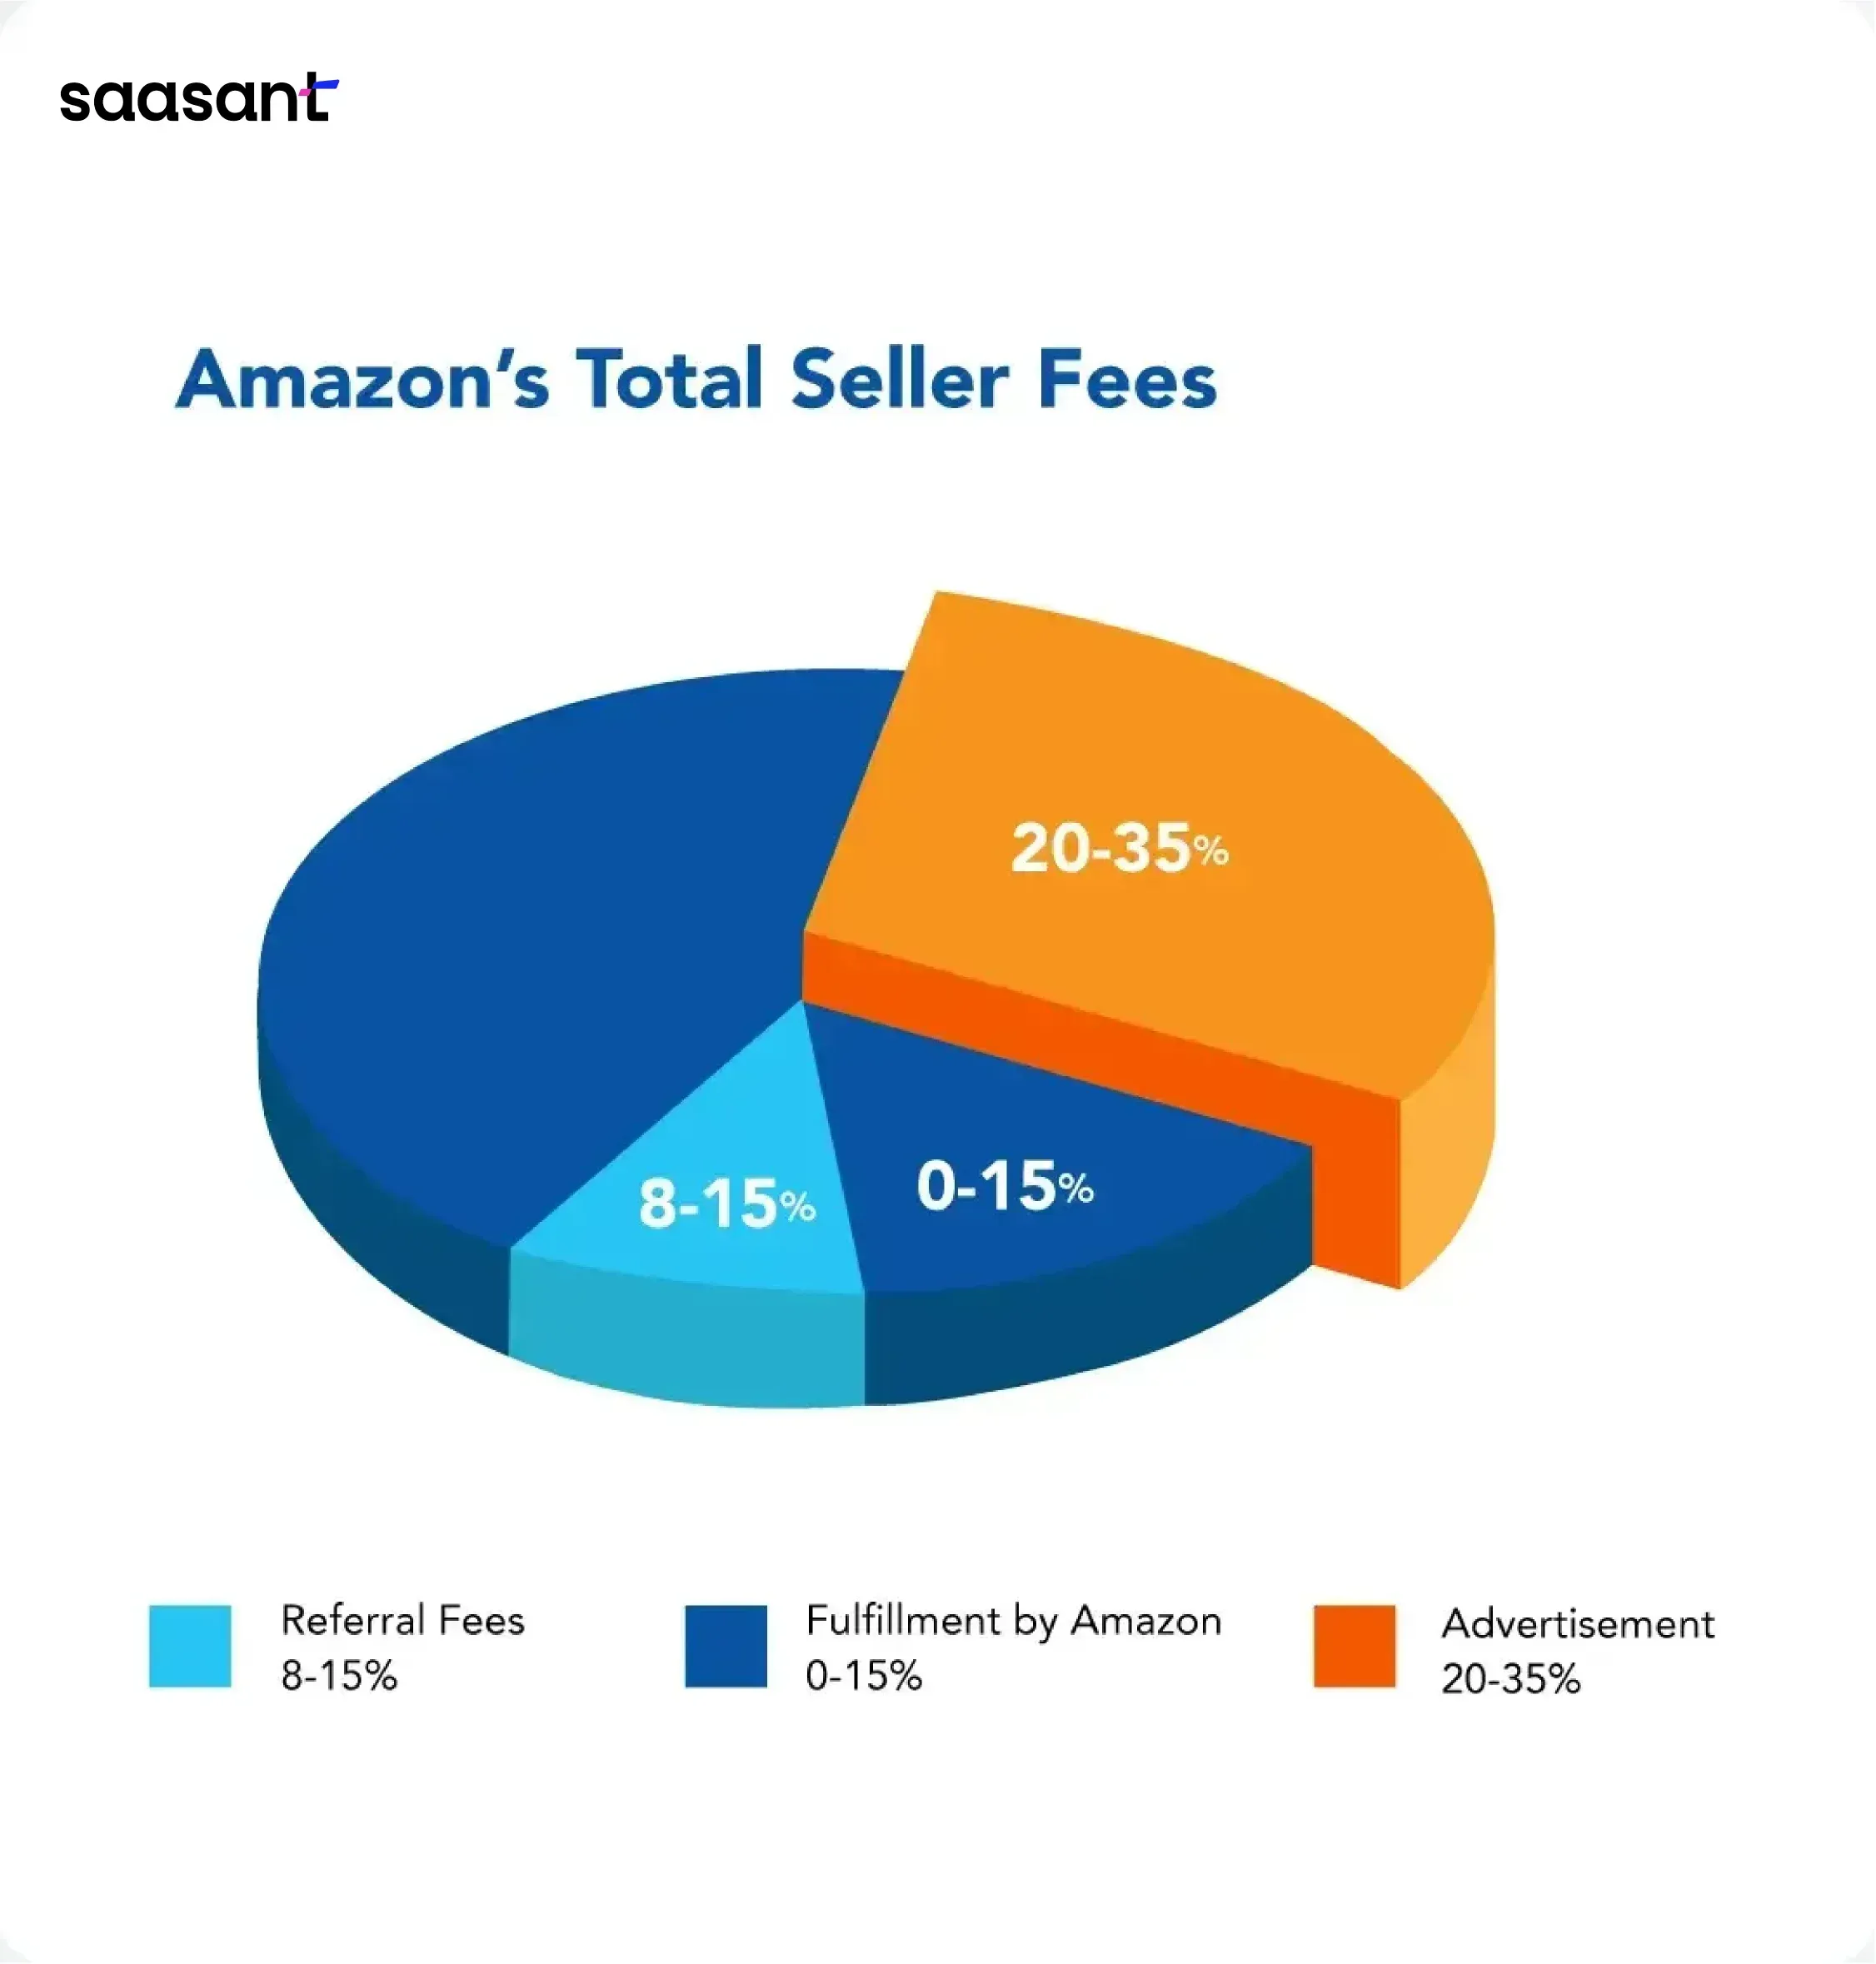 image_Amazons_Total_Seller_Fees_min_eb61a97a0a.webp